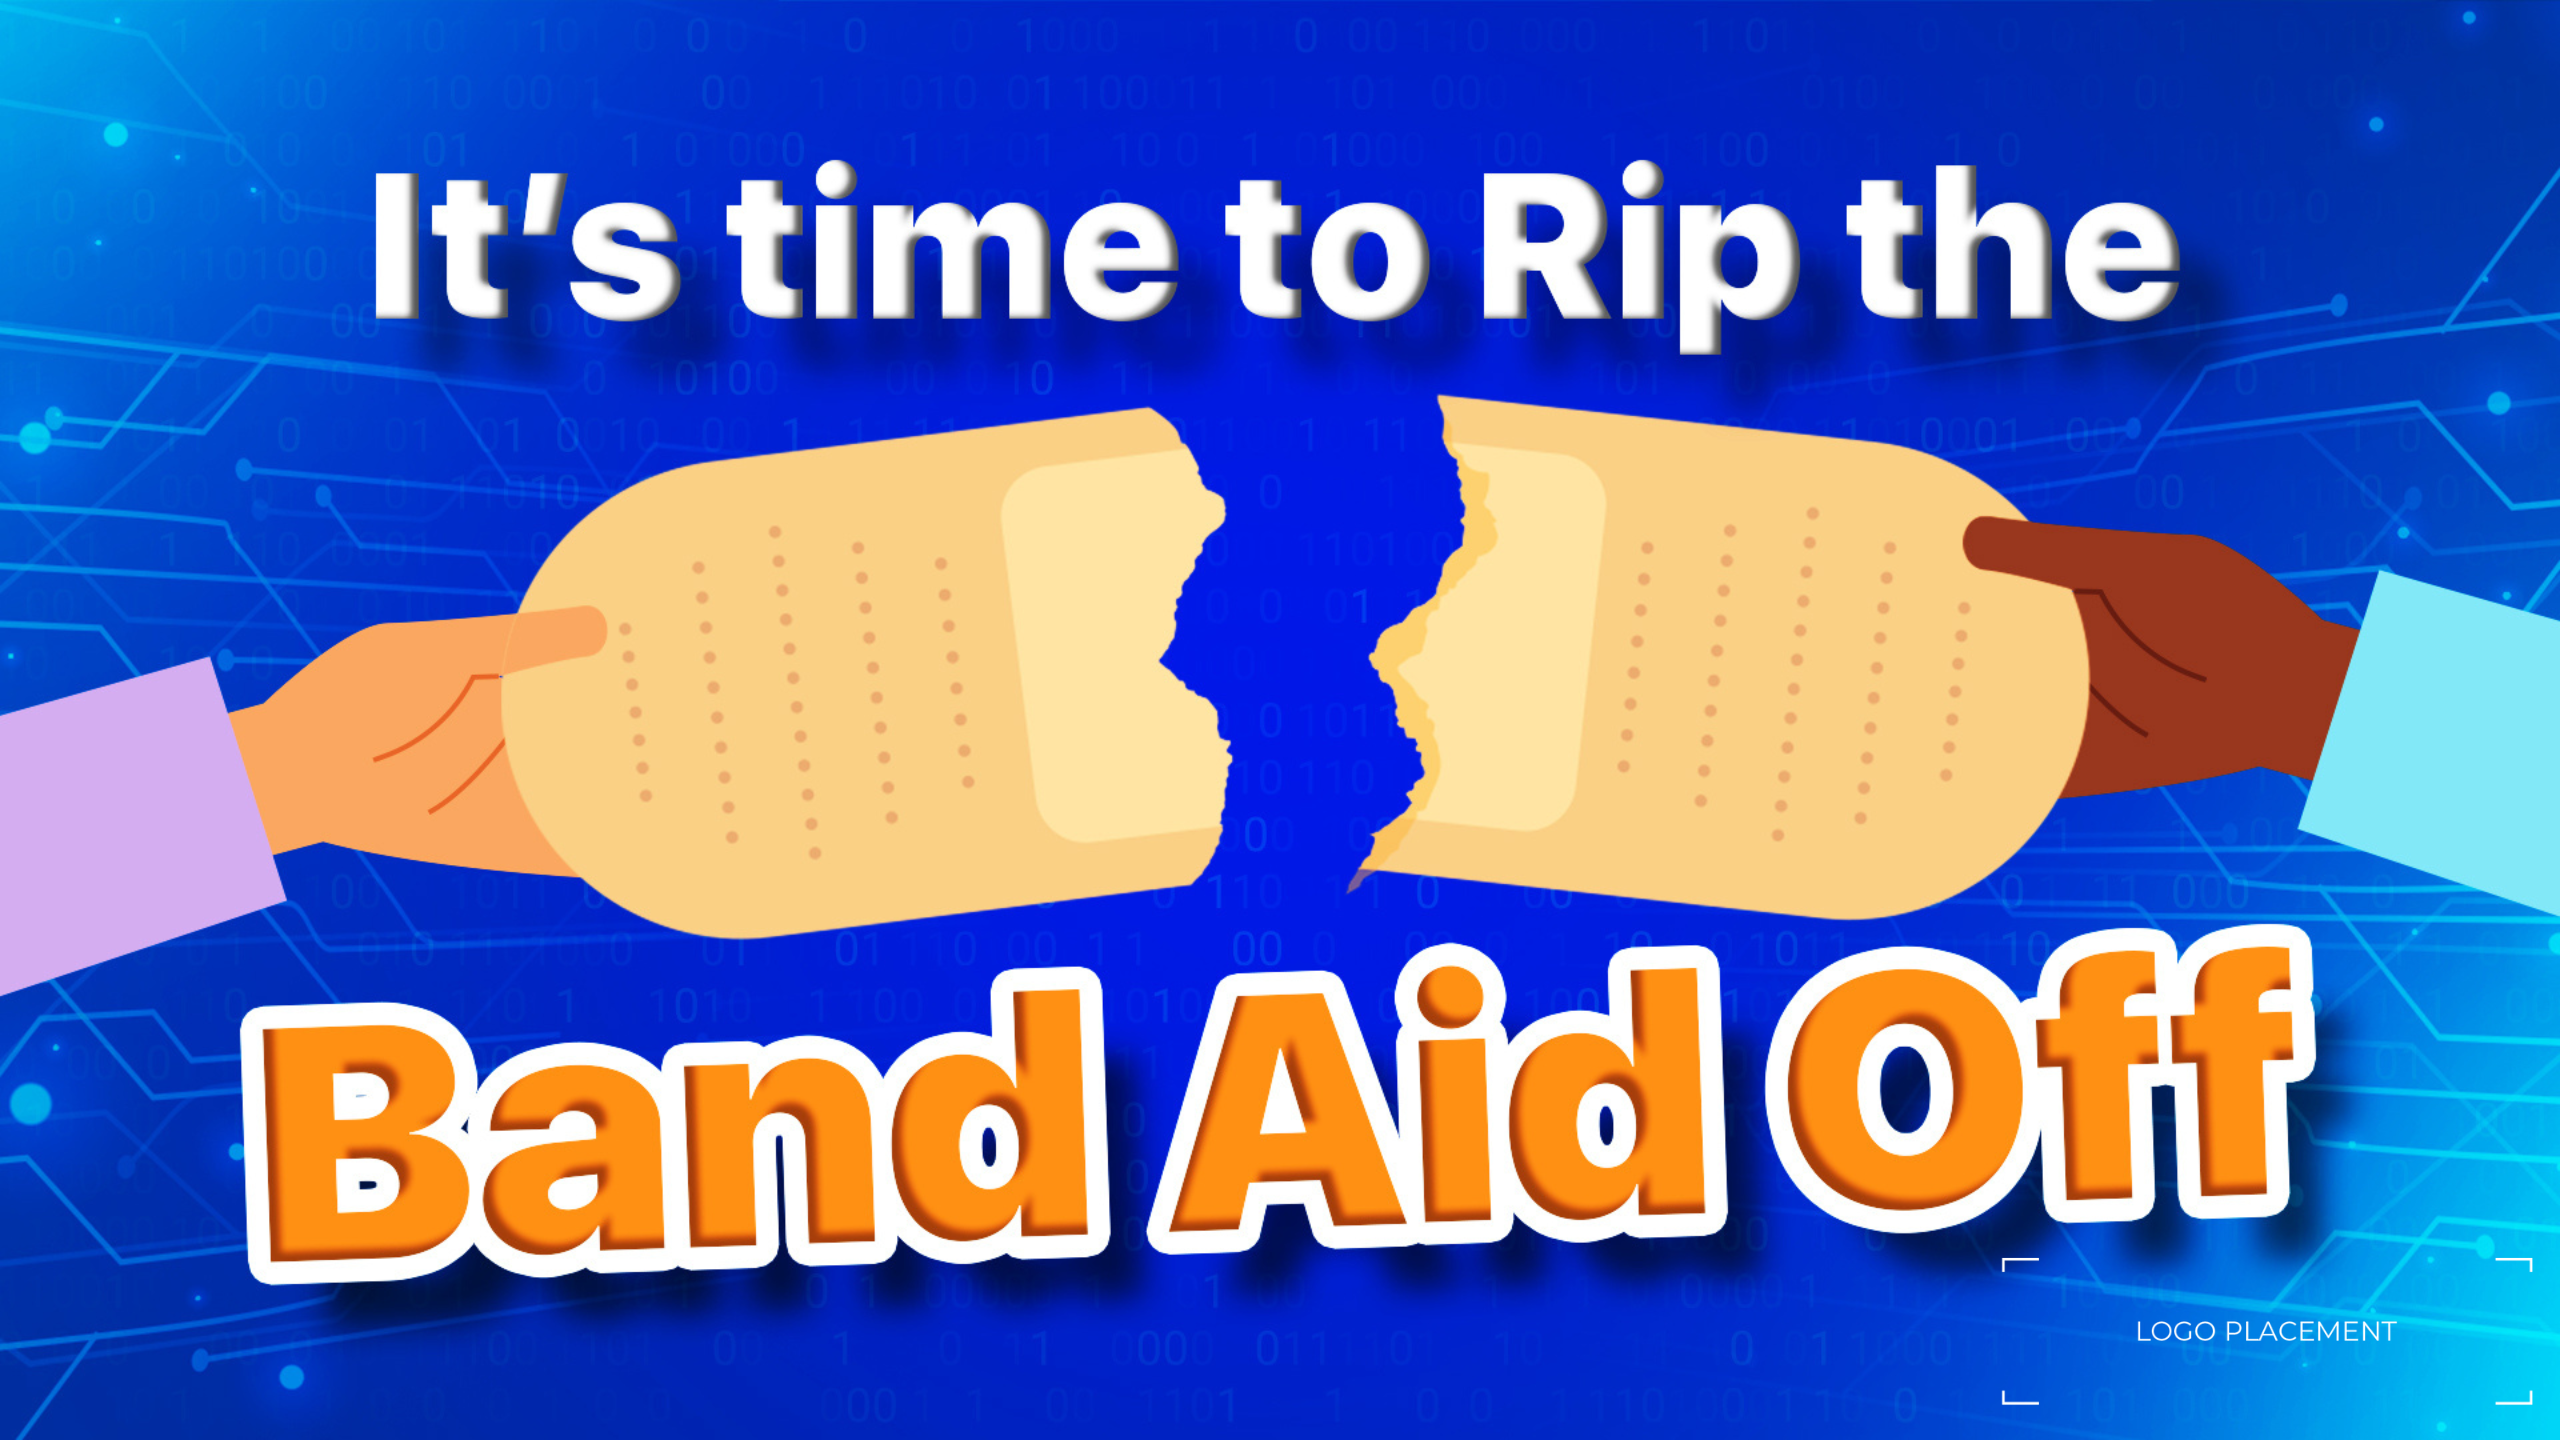 It's time to rip the band aid off image of band aid ripping